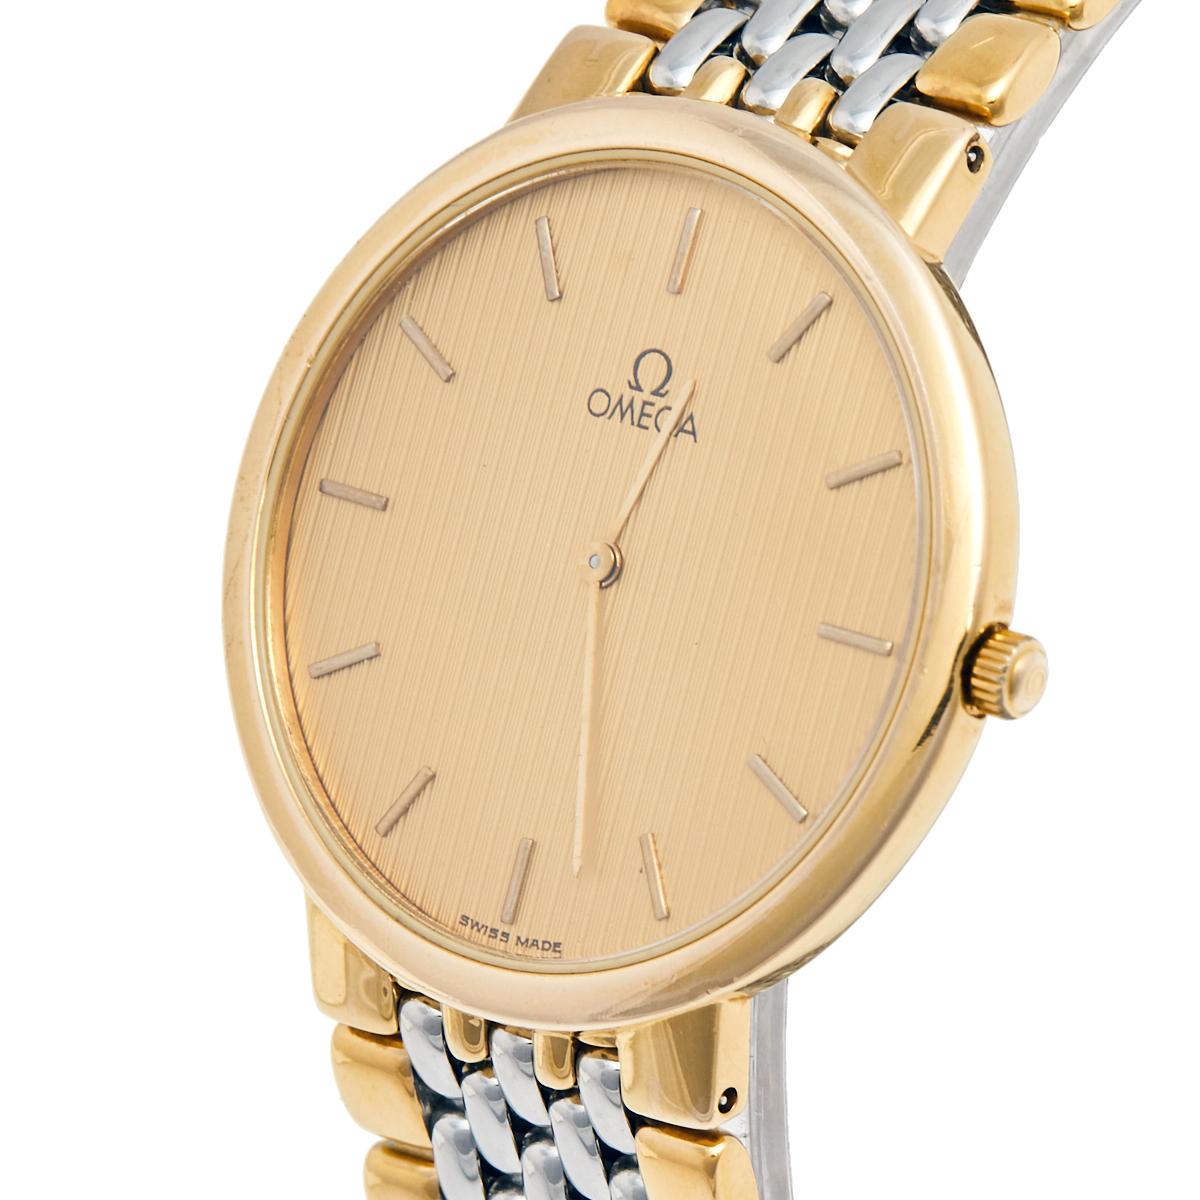 A creation to pair with formals or casuals alike is this Omega De Ville beauty. Made from two-tone stainless steel, the watch is smooth and efficient. The case is slim and it holds a champagne dial fixed with stick hour markers, two hands, and the